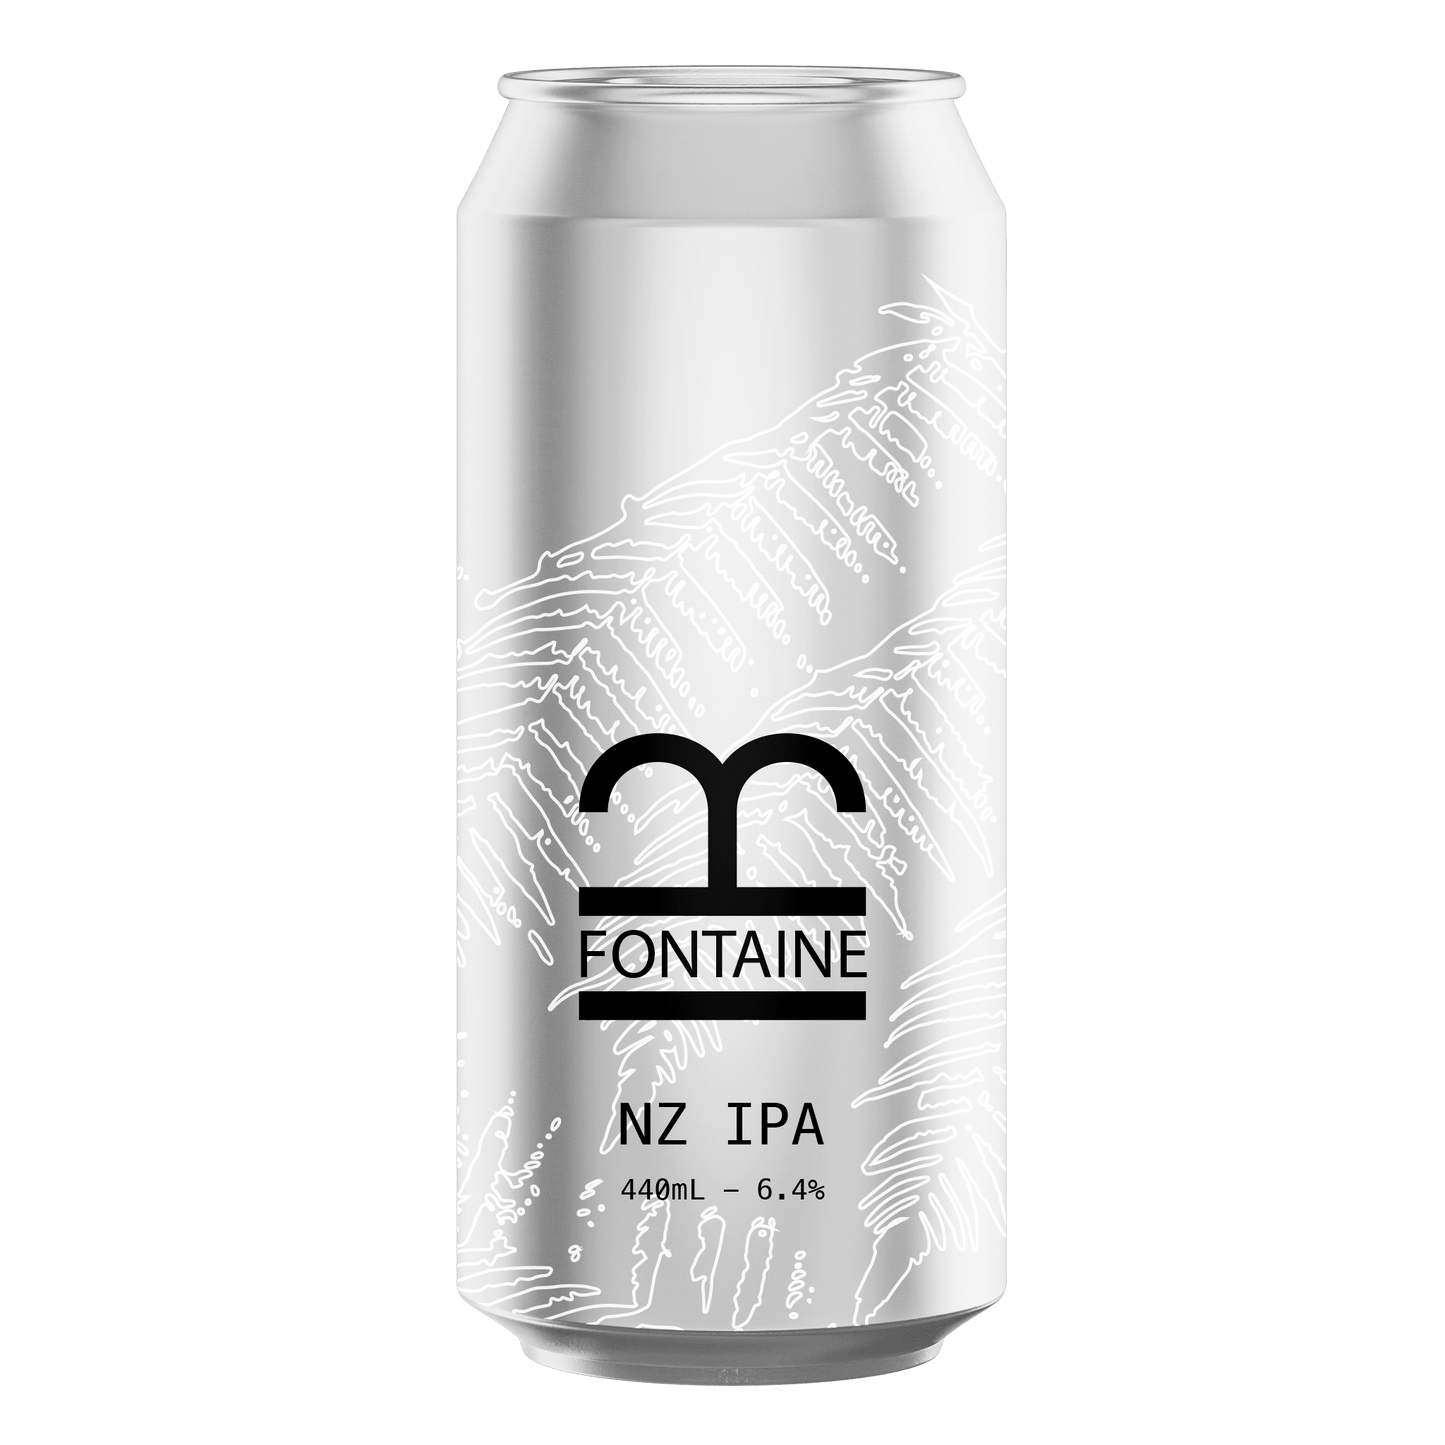 The All Hops - NZ IPA (Megamix) - 440mL Can